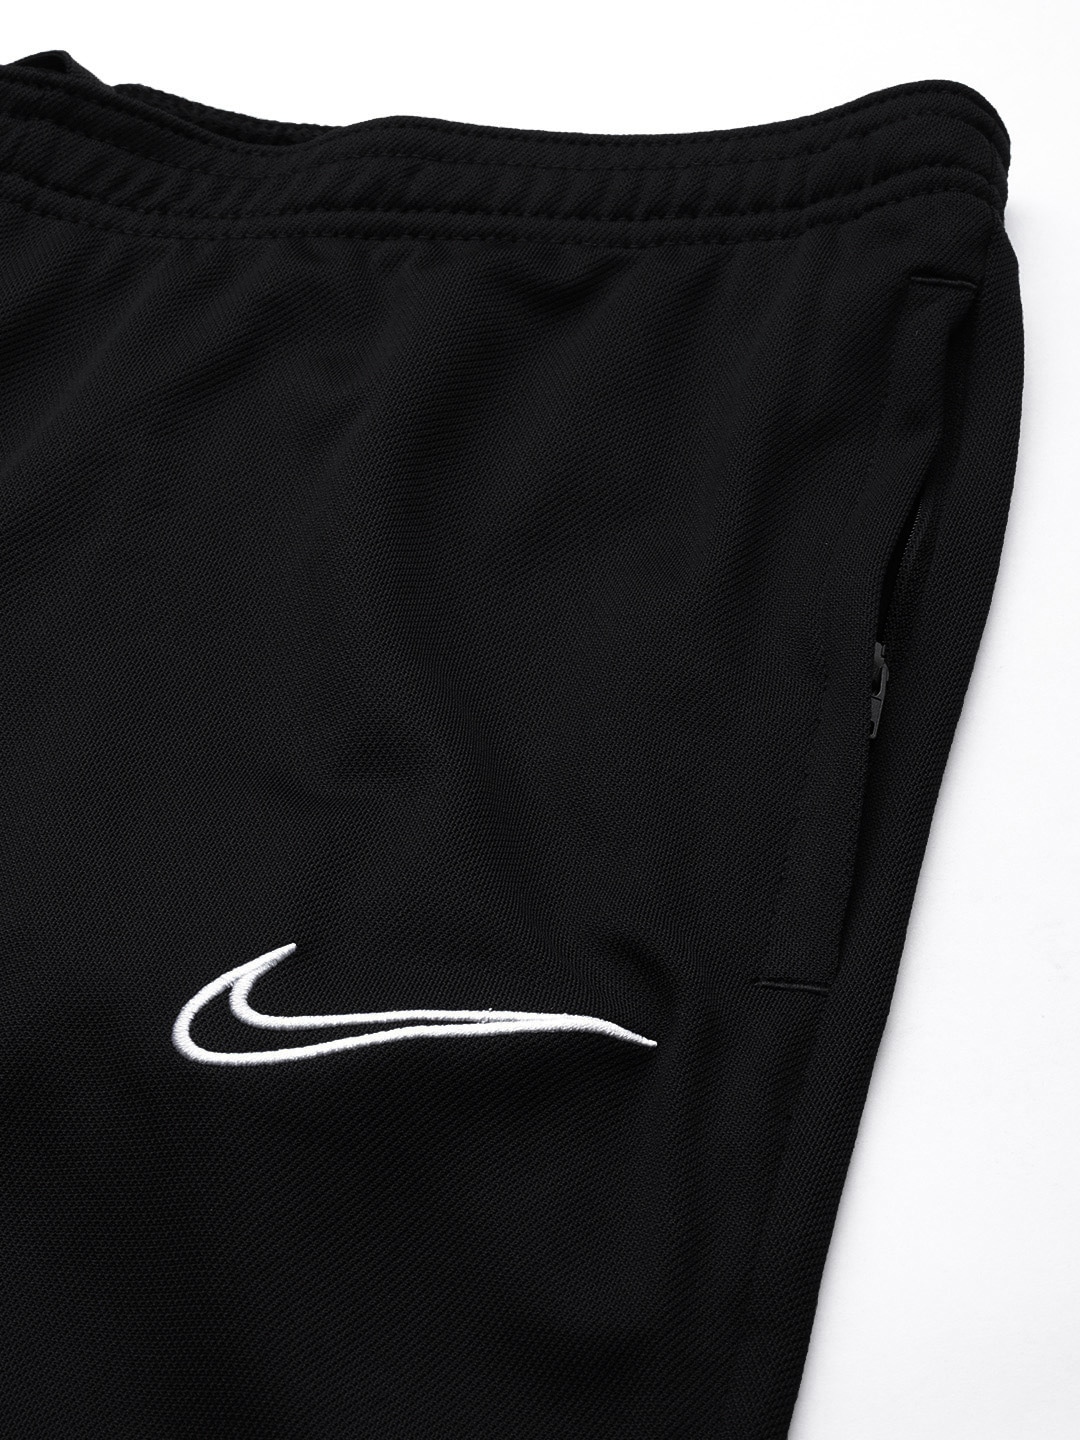 Clothing Tracksuits | Nike Men Black Brand Logo Embroidered Dri-FIT Knit Soccer Tracksuit - EI09176